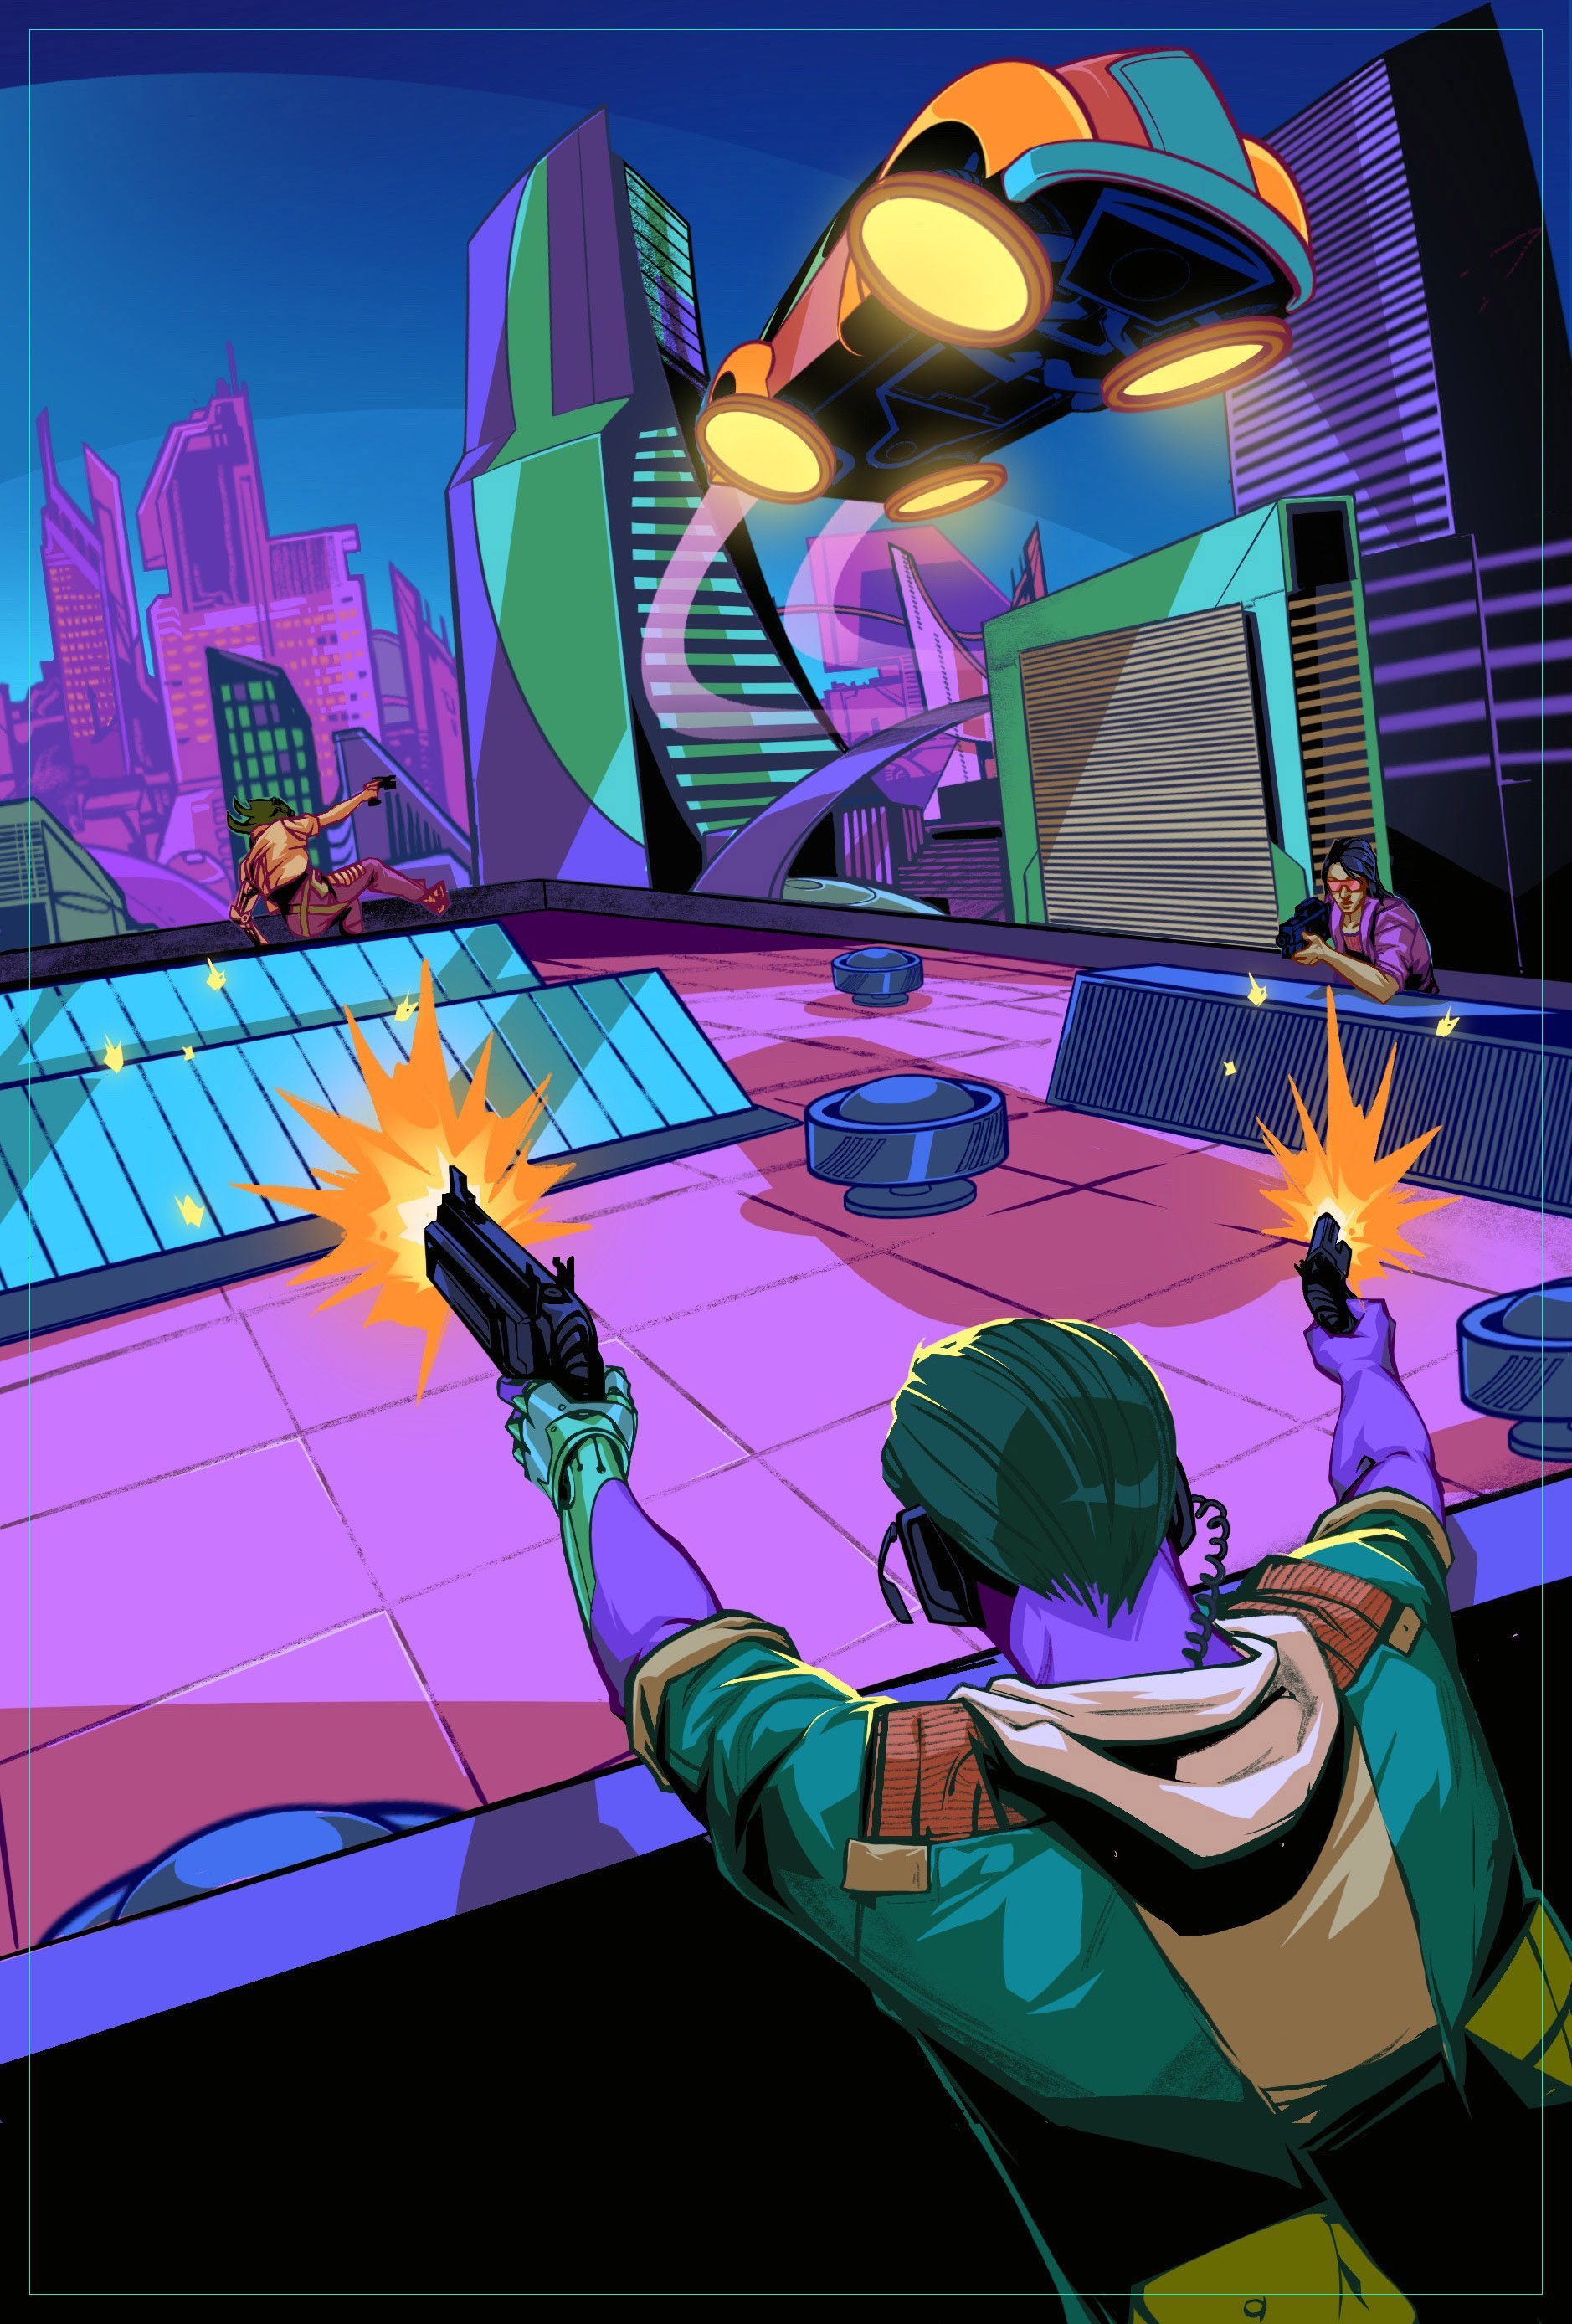 An illustration of three people engaged in a dynamic gunfight on the roof of a futuristic skyscraper while a flying car gets ready to land above